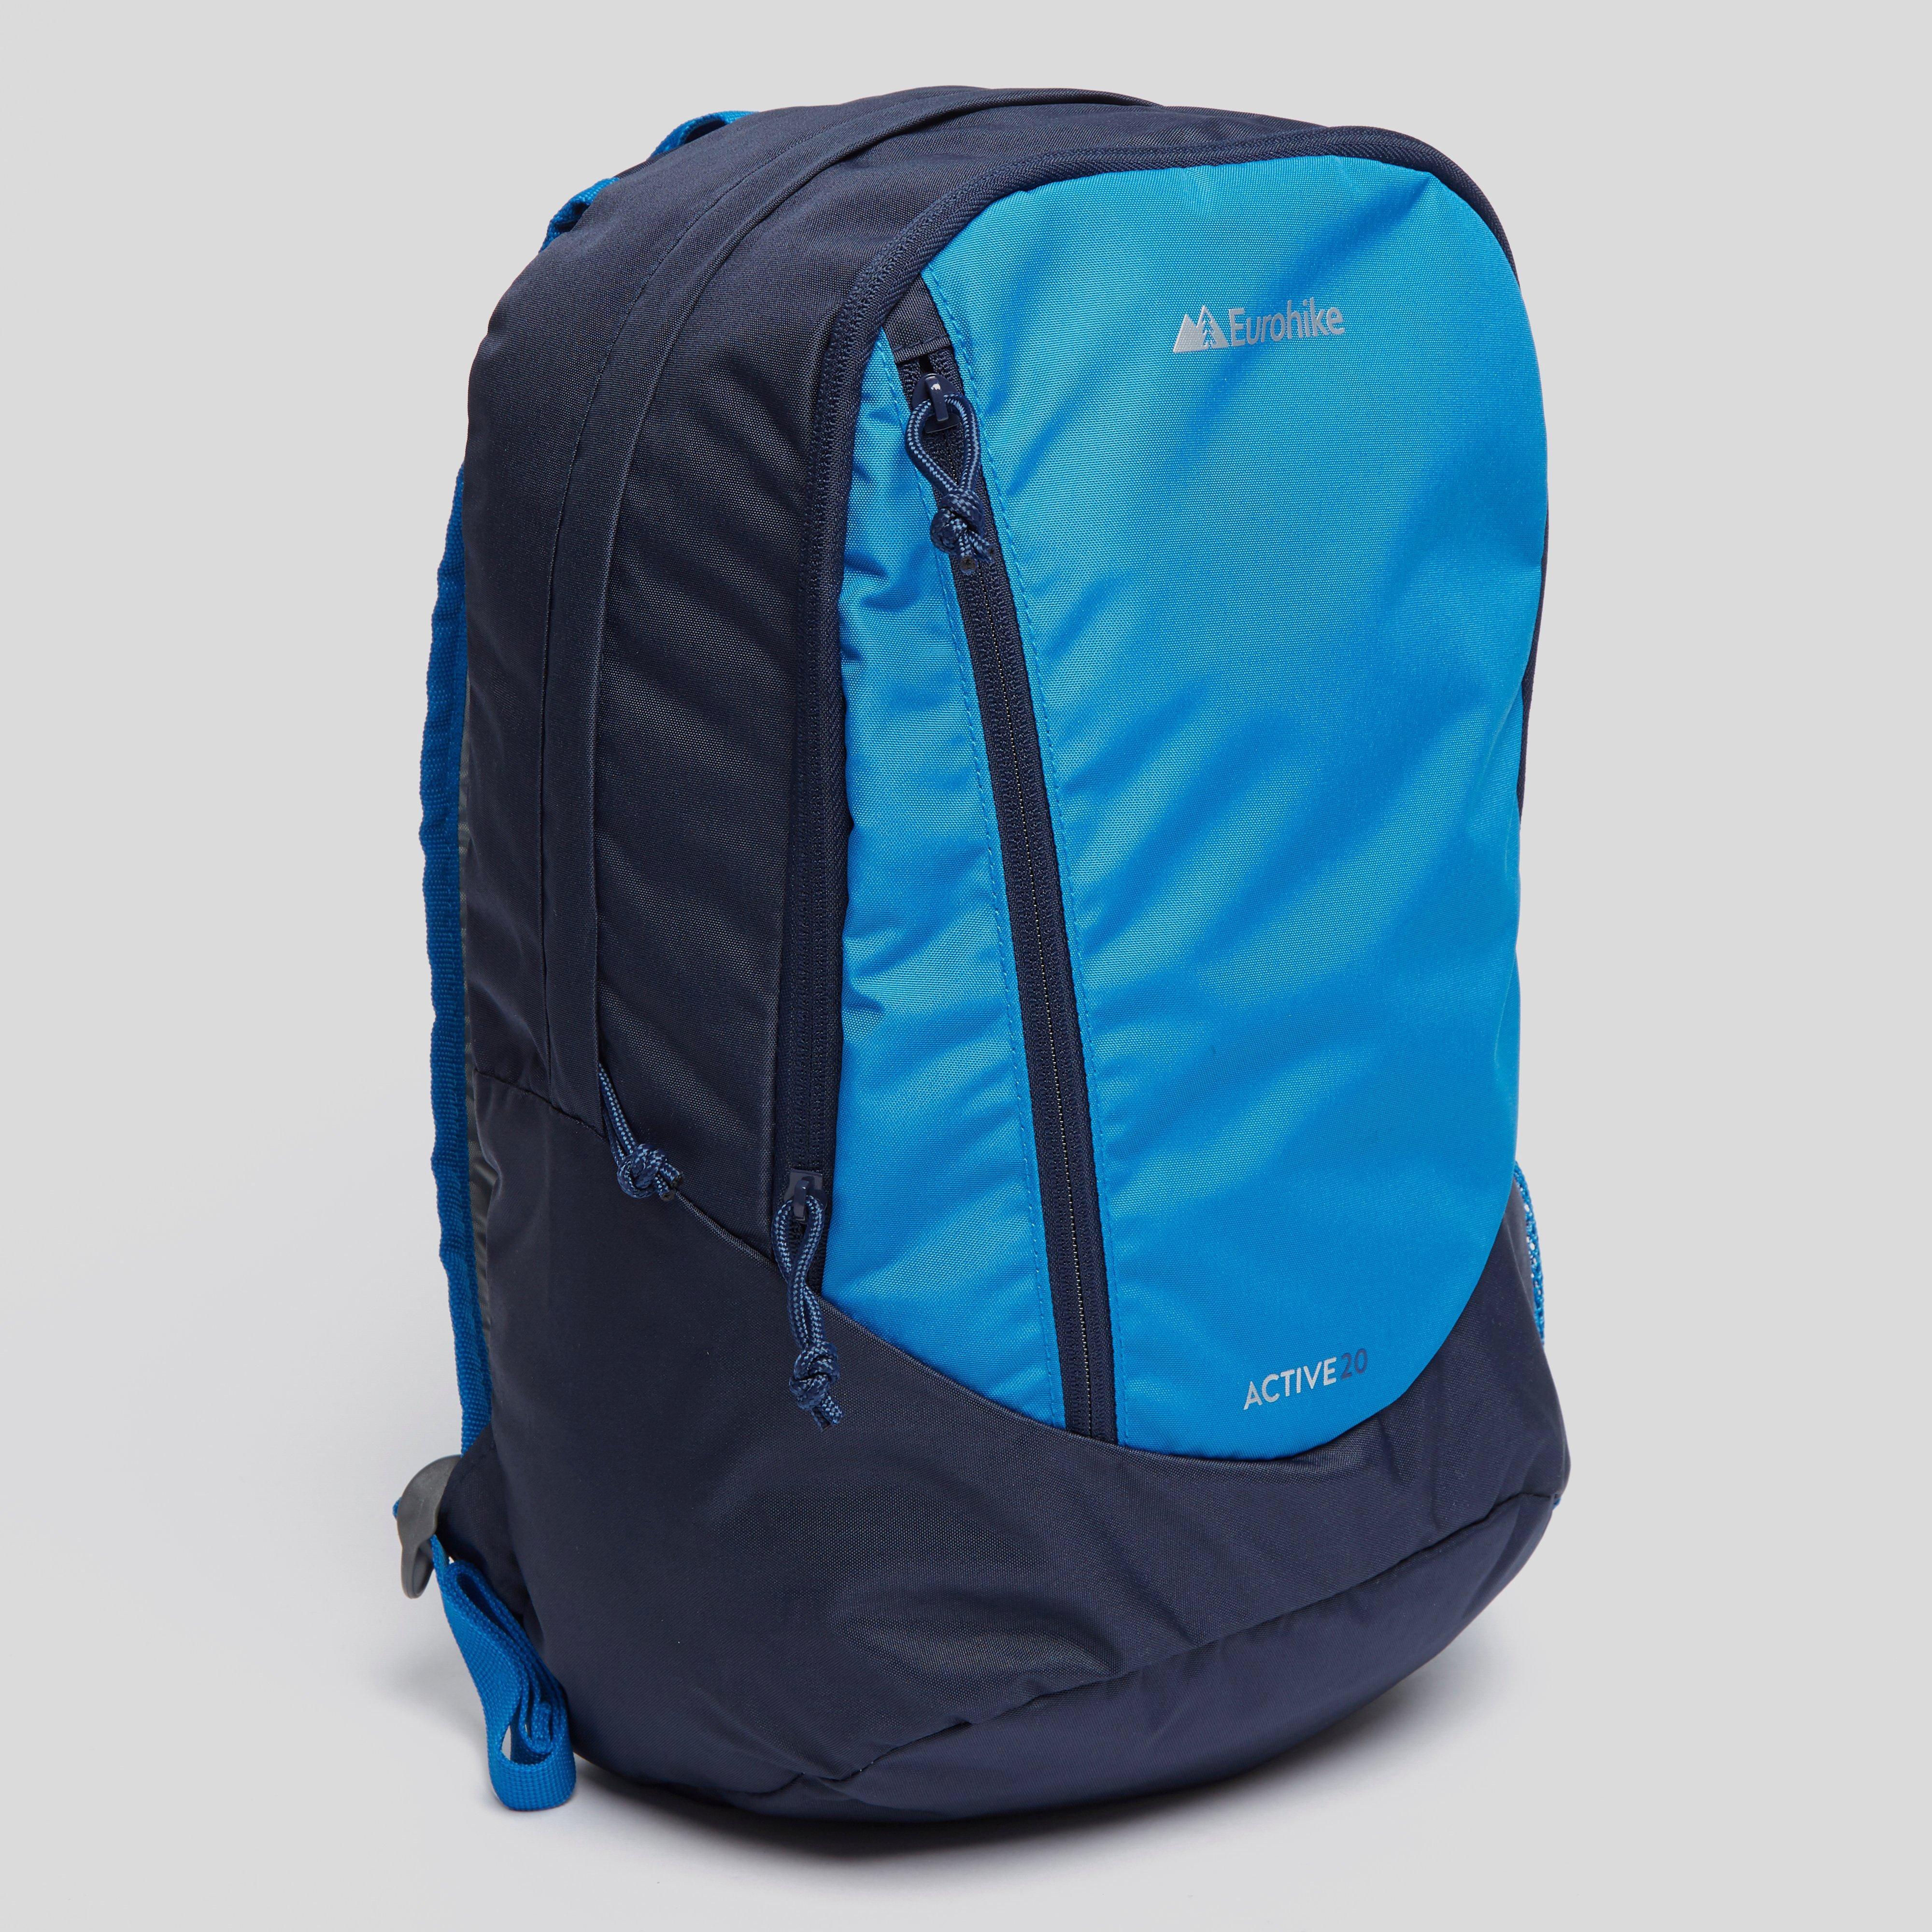 Eurohike Active 20 Daypack - Navy, Navy